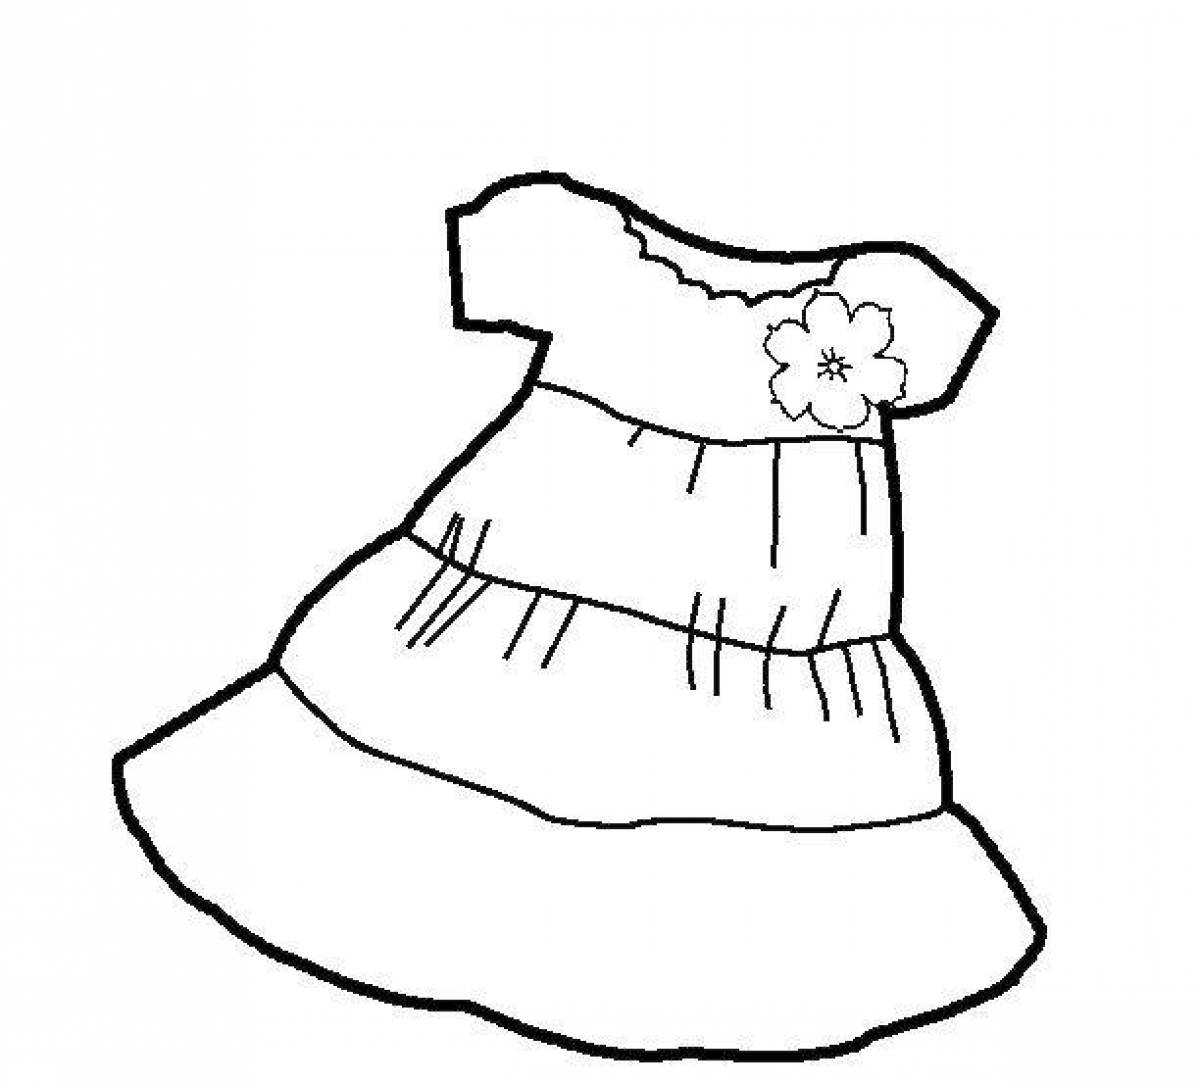 Dress with a flower